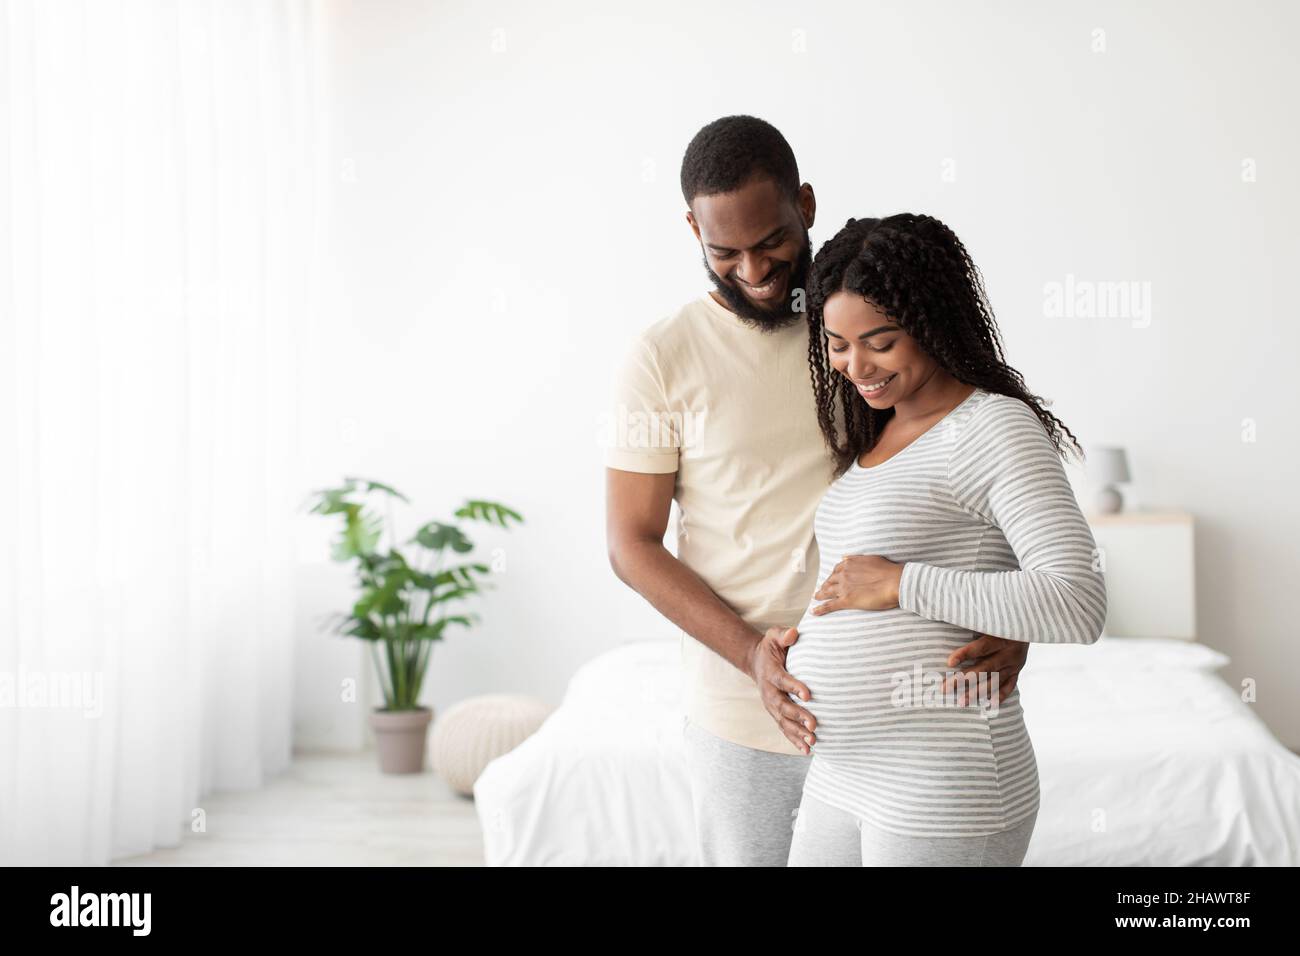 Smiling young african american husband hugs pregnant wife, touching belly in minimalist bedroom interior Stock Photo